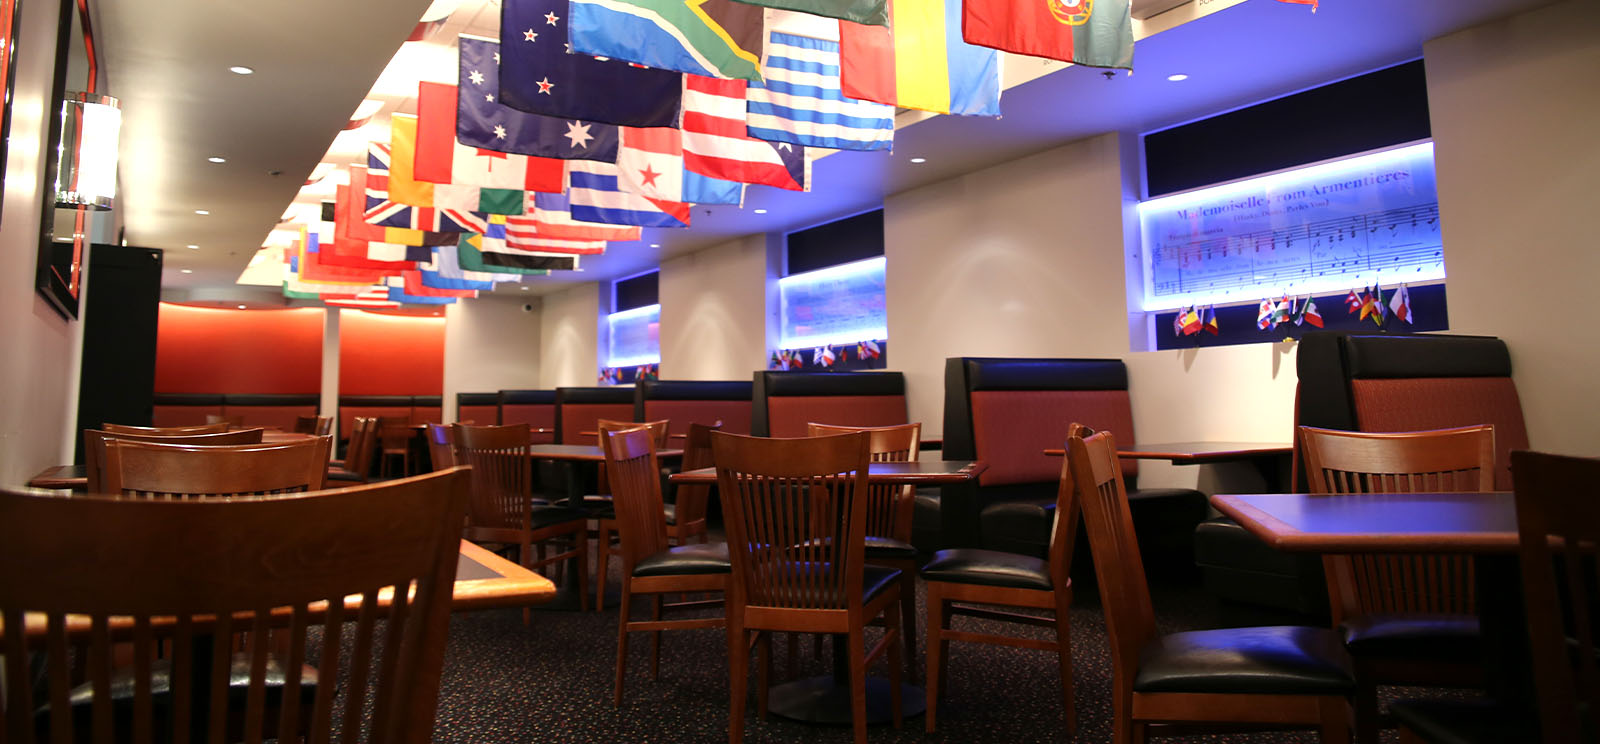 Seated area of the museum cafe. Flags of many nations hang from the ceiling